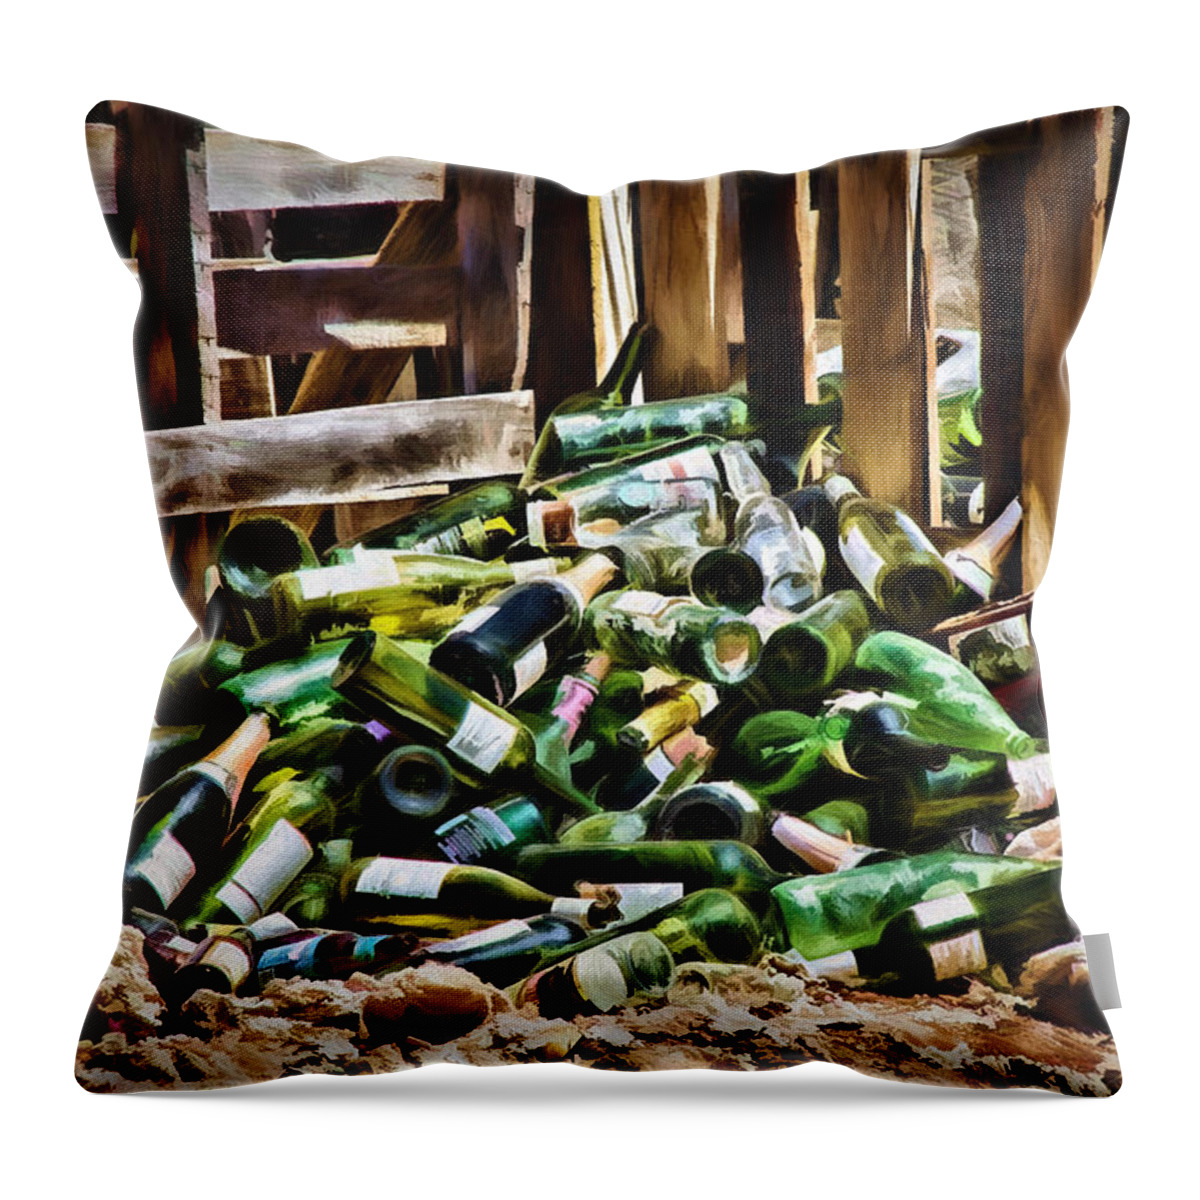 Nm Throw Pillow featuring the photograph The Stash by Lana Trussell